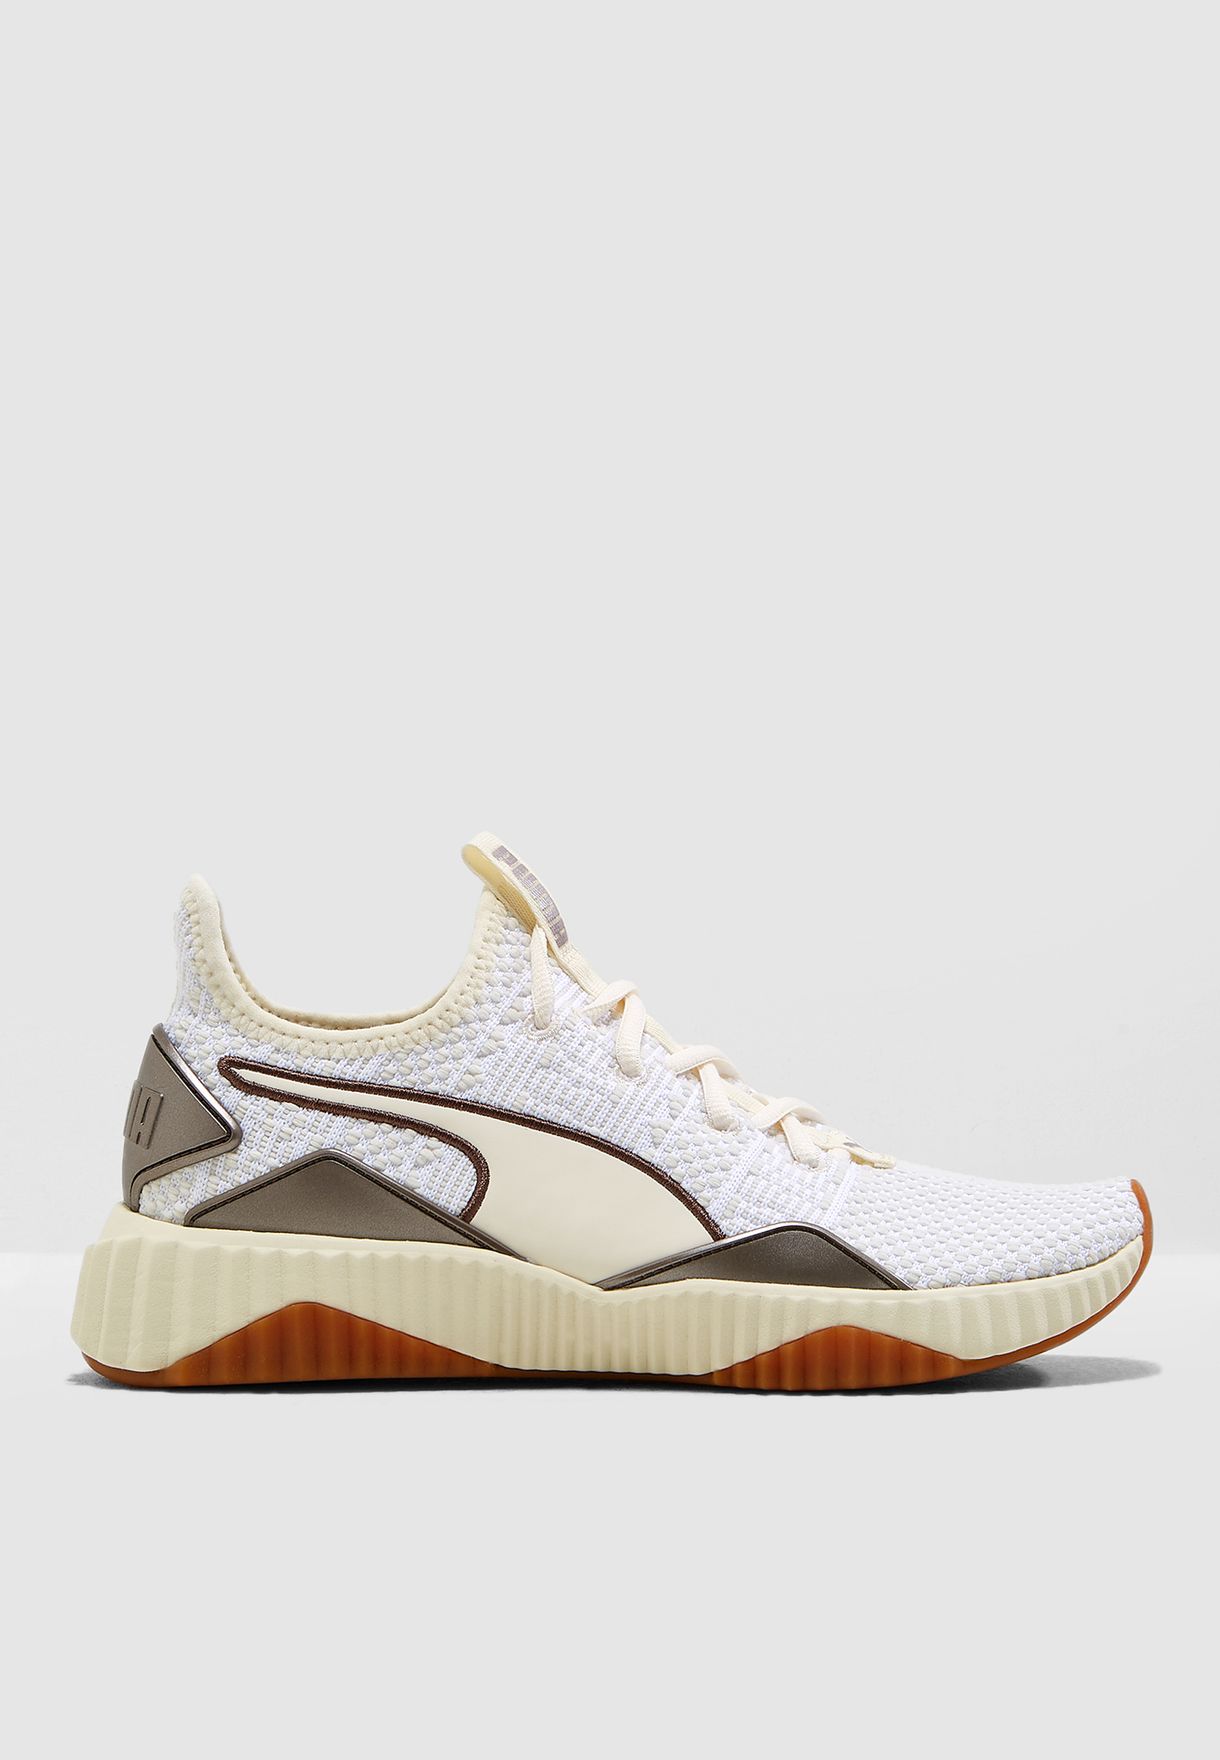 women's puma defy luxe casual shoes